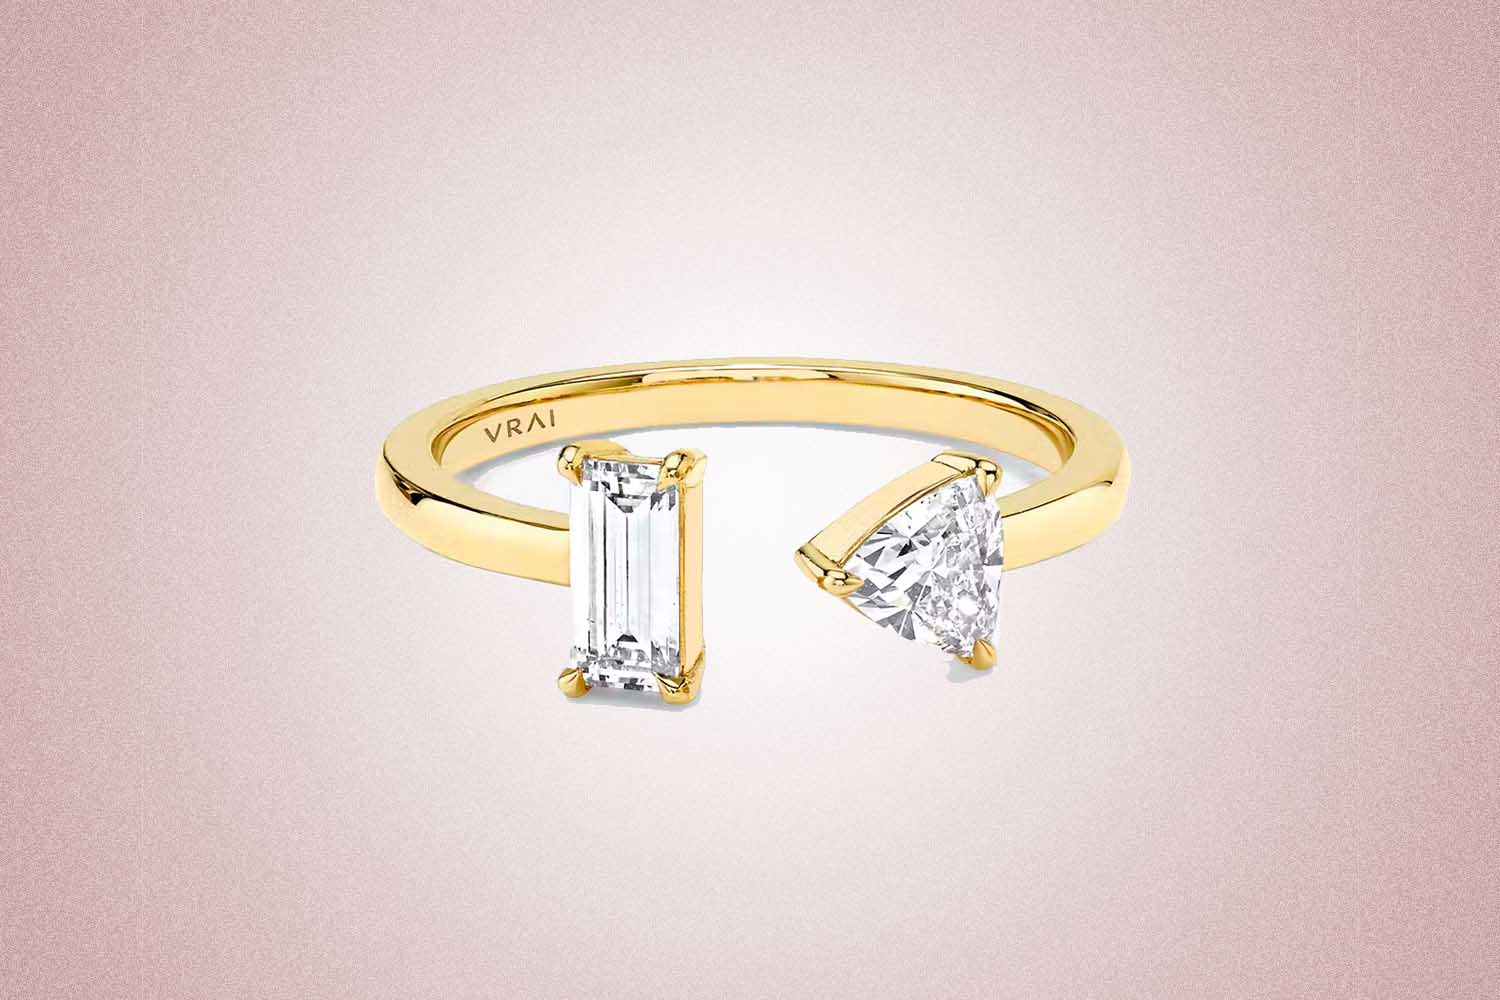 A gold ring with two diamonds, a perfect valentine's day gift, on a pink background.